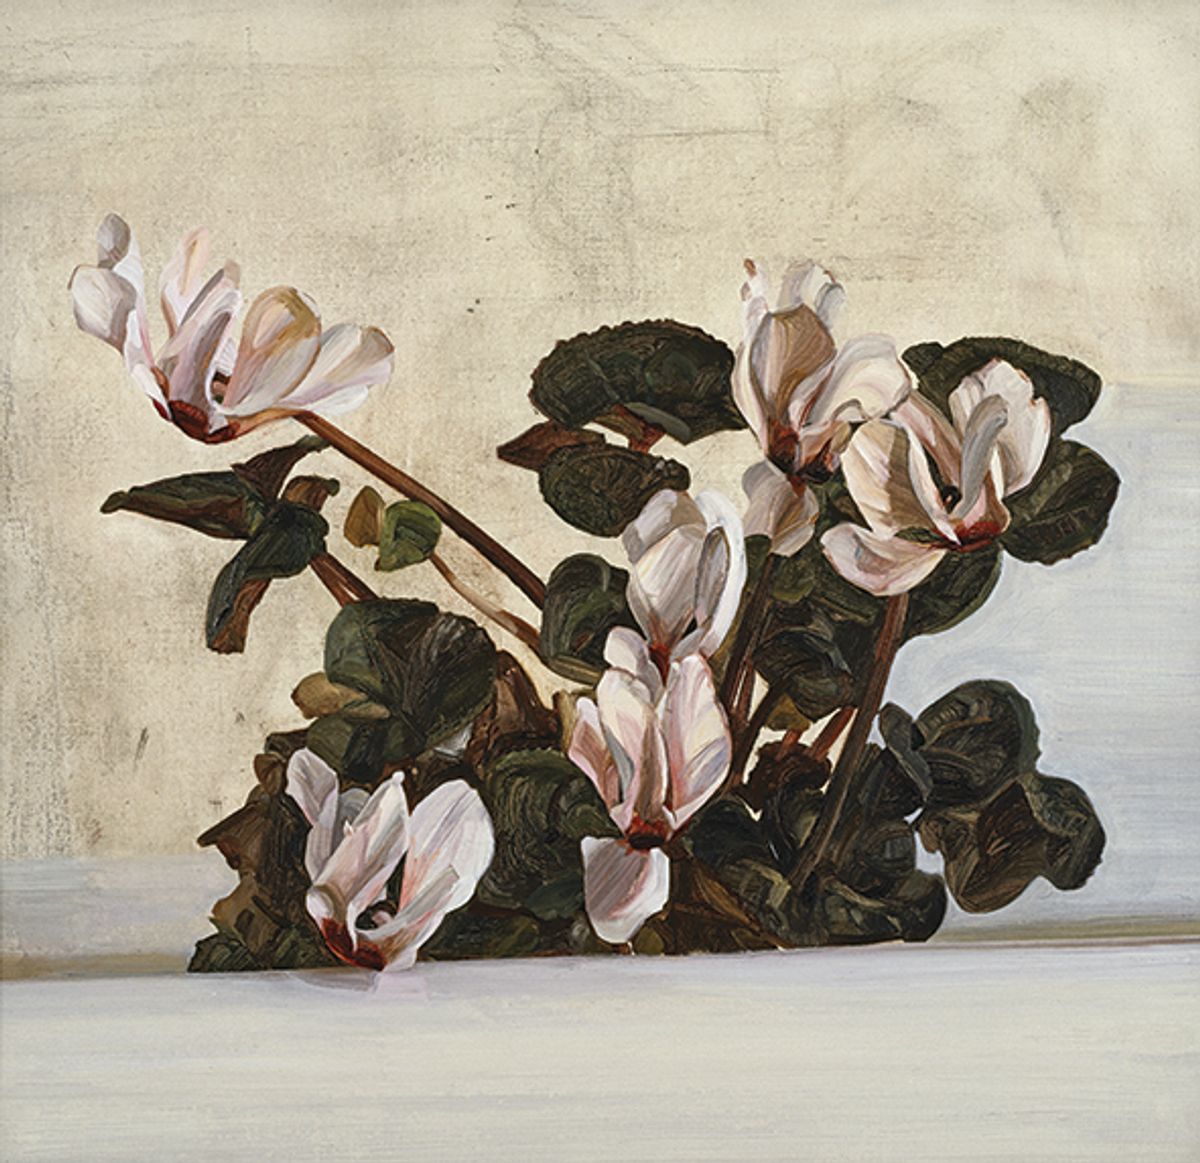 Cyclamen (1964) highlights Lucian Freud’s enduring fondness for the plant © The Lucian Freud Archive / Bridgeman Images